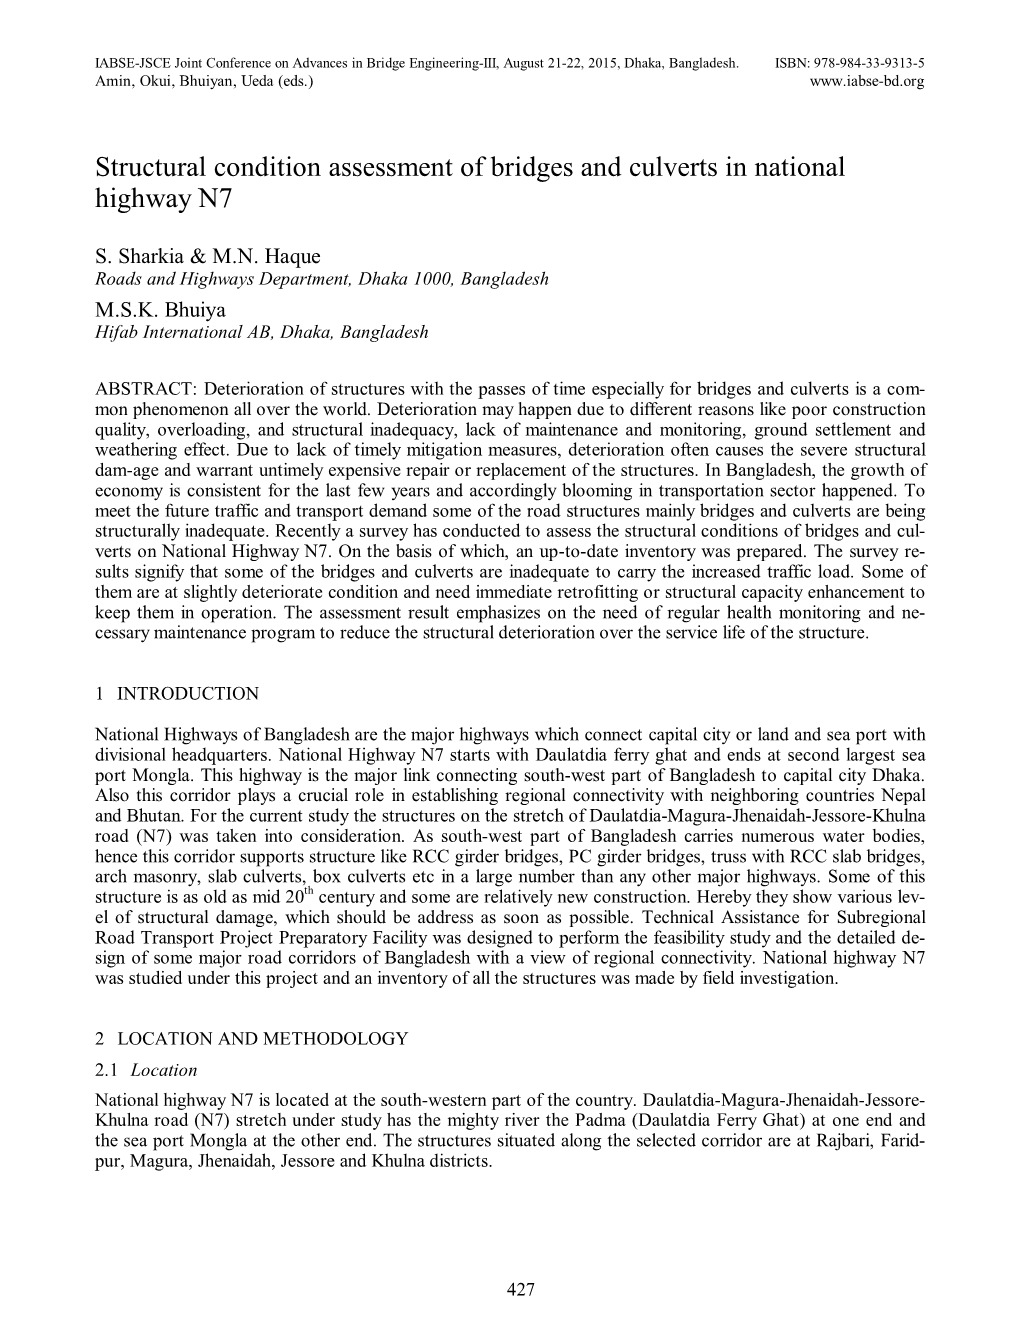 Structural Condition Assessment of Bridges and Culverts in National Highway N7